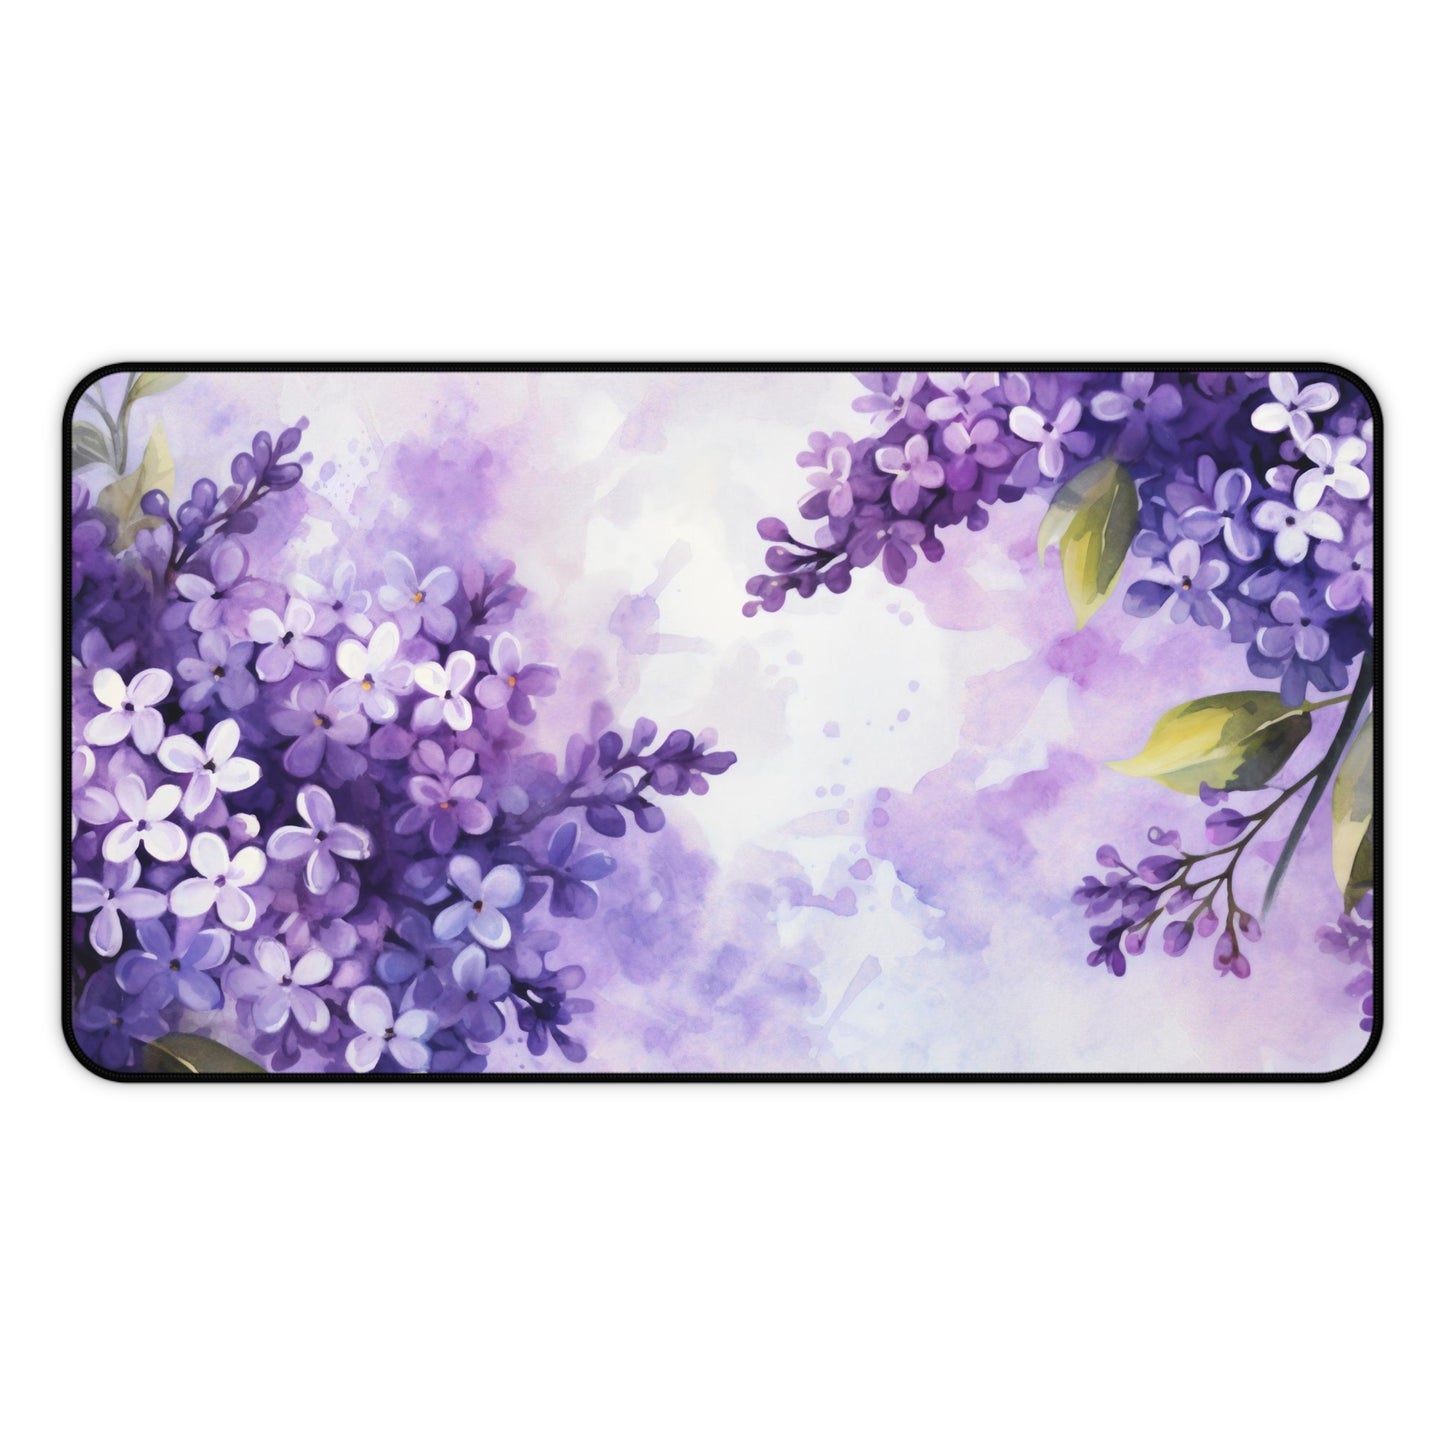 Lilac Blooms Desk Mat, Purple Watercolor Flowers Mouse Pad for Serene Desk Decor, Aesthetic Gaming Mousepad, Unique Workspace Accessory Gift